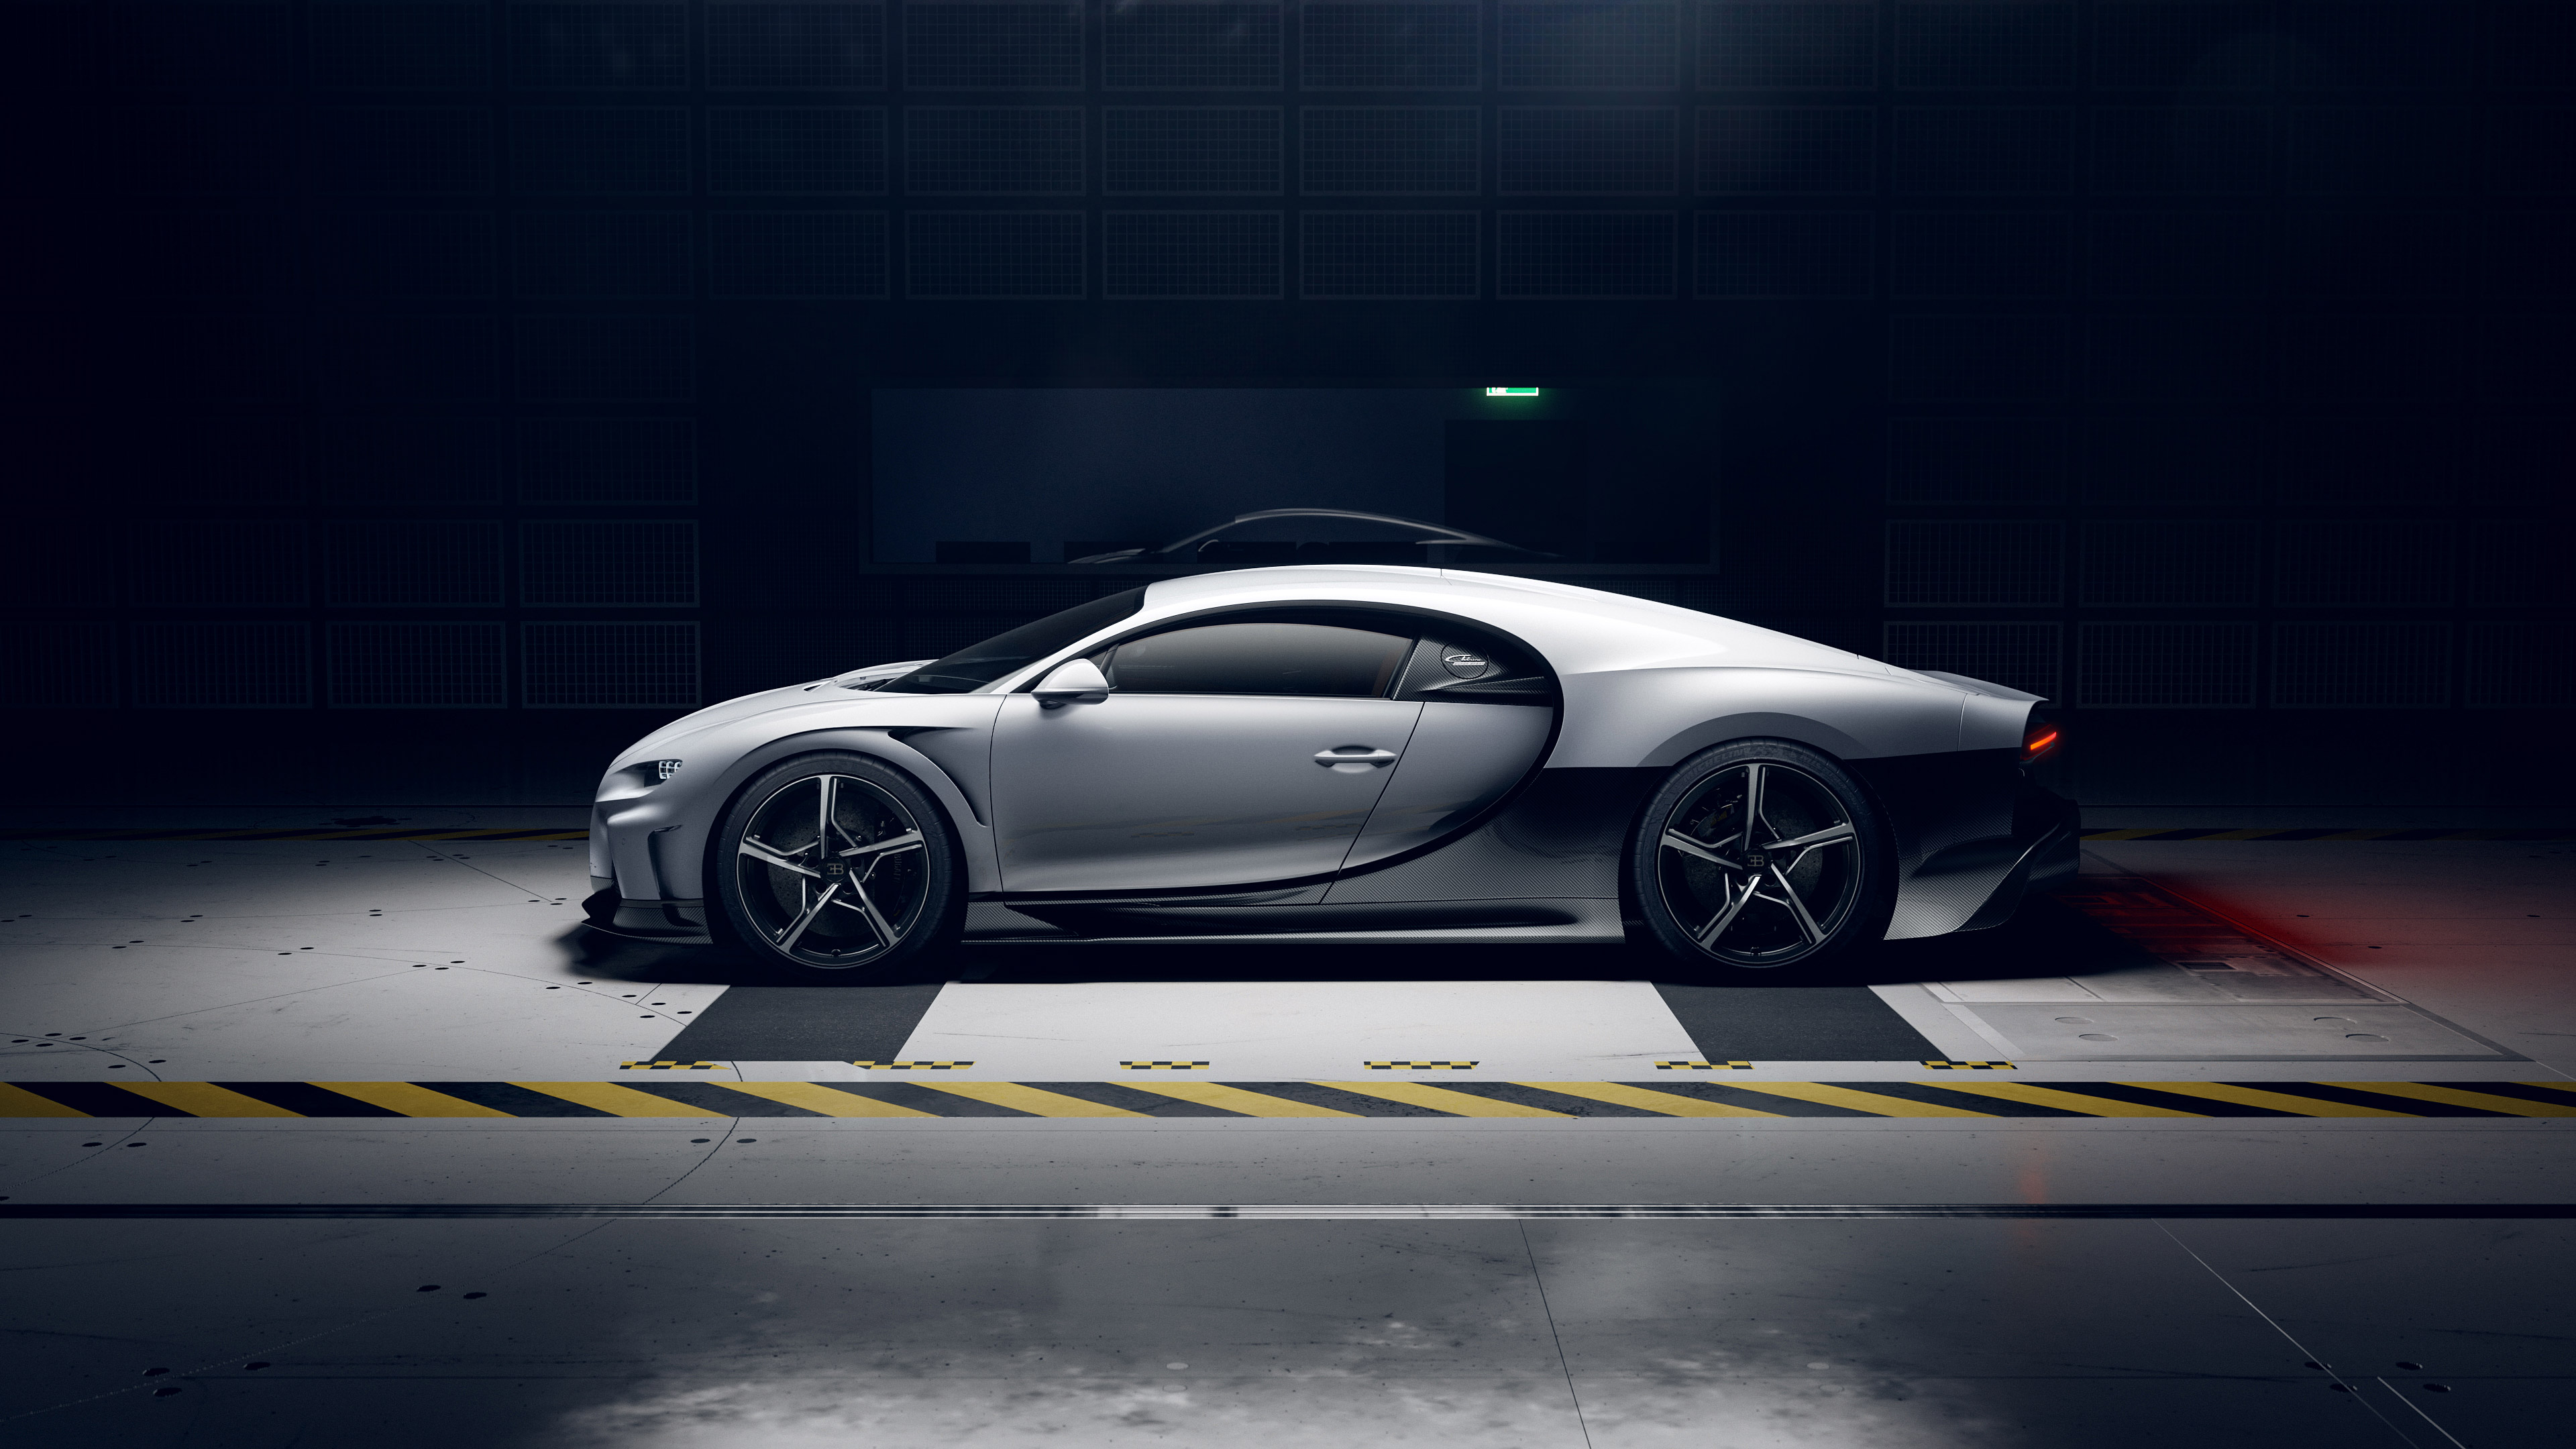 Bugatti race car in a city  Synthwave style Ai Generated car wallpaperbackground   Stock Illustration  Adobe Stock